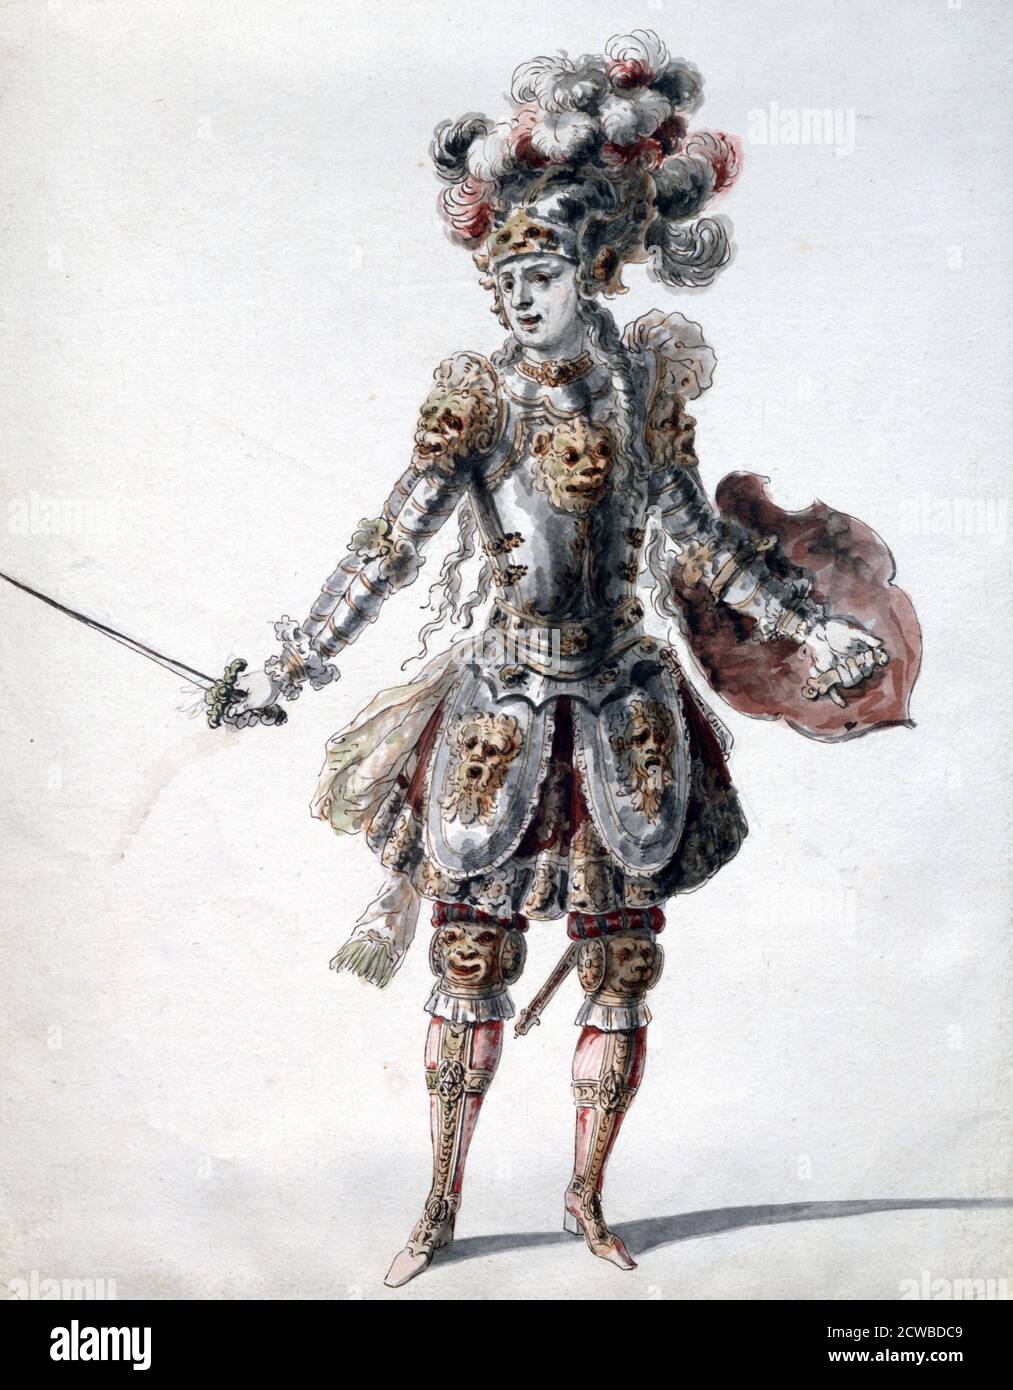 Enchanted Knight', c1685. Costume design by Jean Berain the Elder for an opera by Jean-Baptiste Lully. By the French artist Jean Berain. Stock Photo